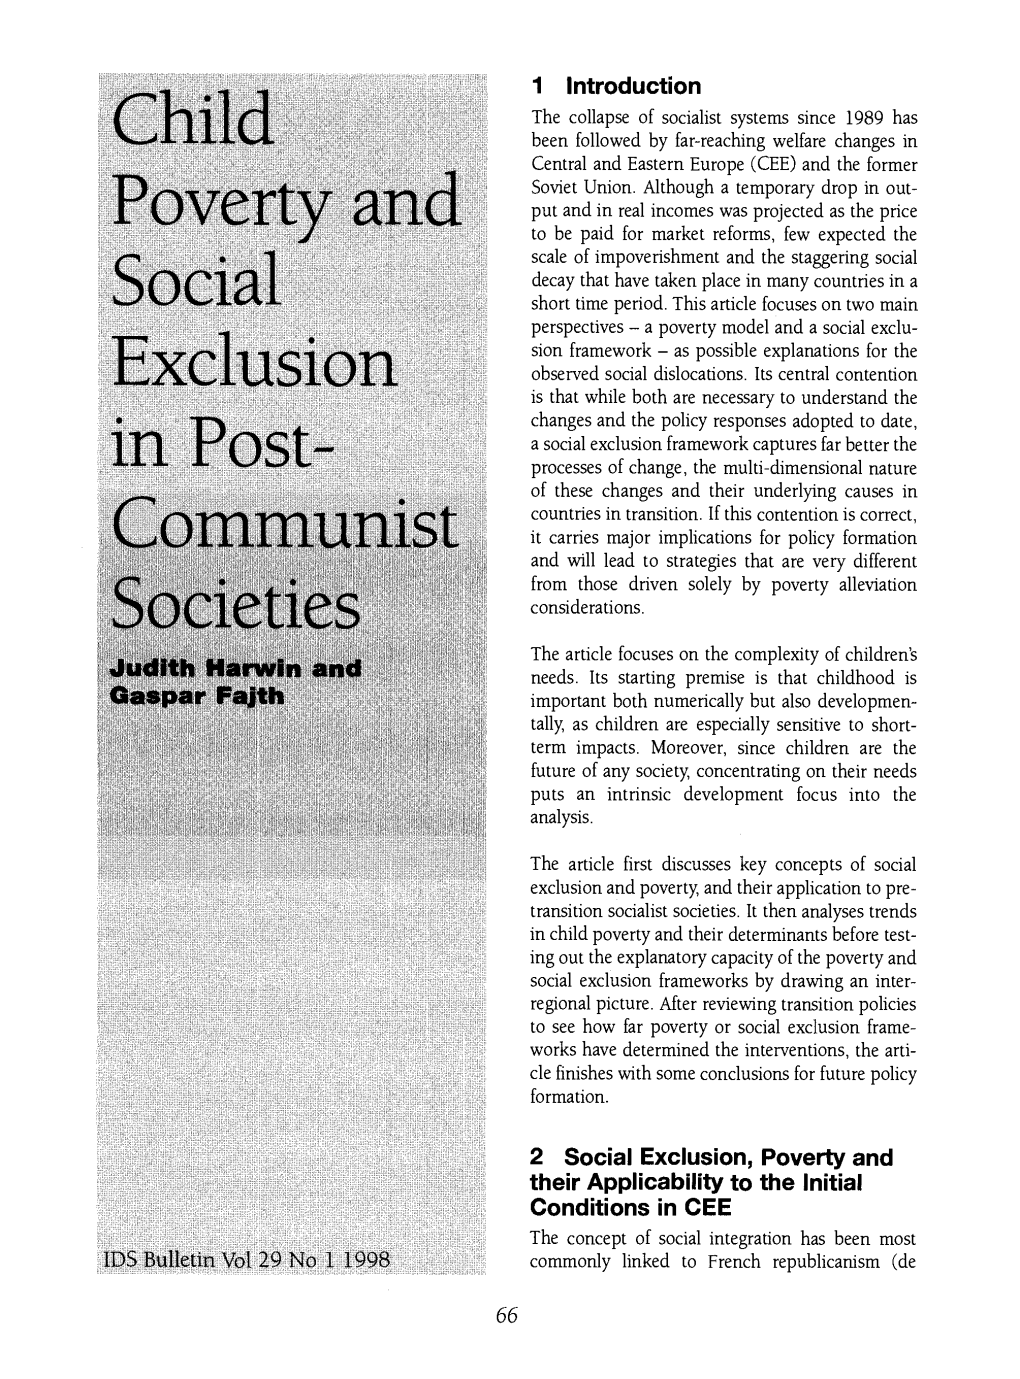 Child Poverty and Social Exclusion in Post-Communist Societies